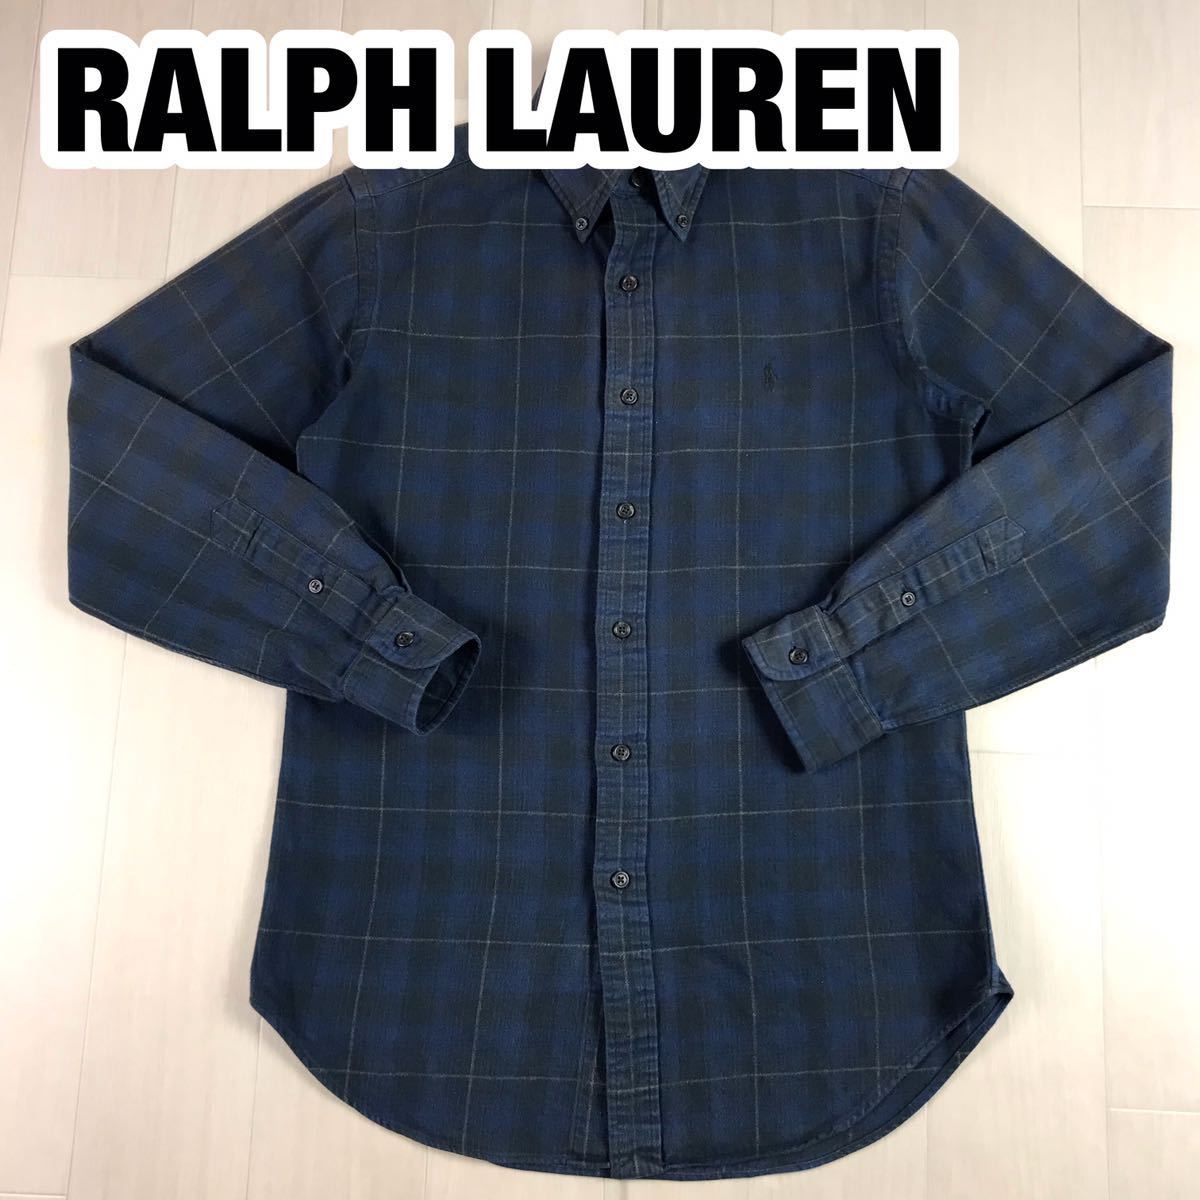 RALPH LAUREN Ralph Lauren long sleeve shirt XS 165/88A multicolor check embroidery po knee Youth size 